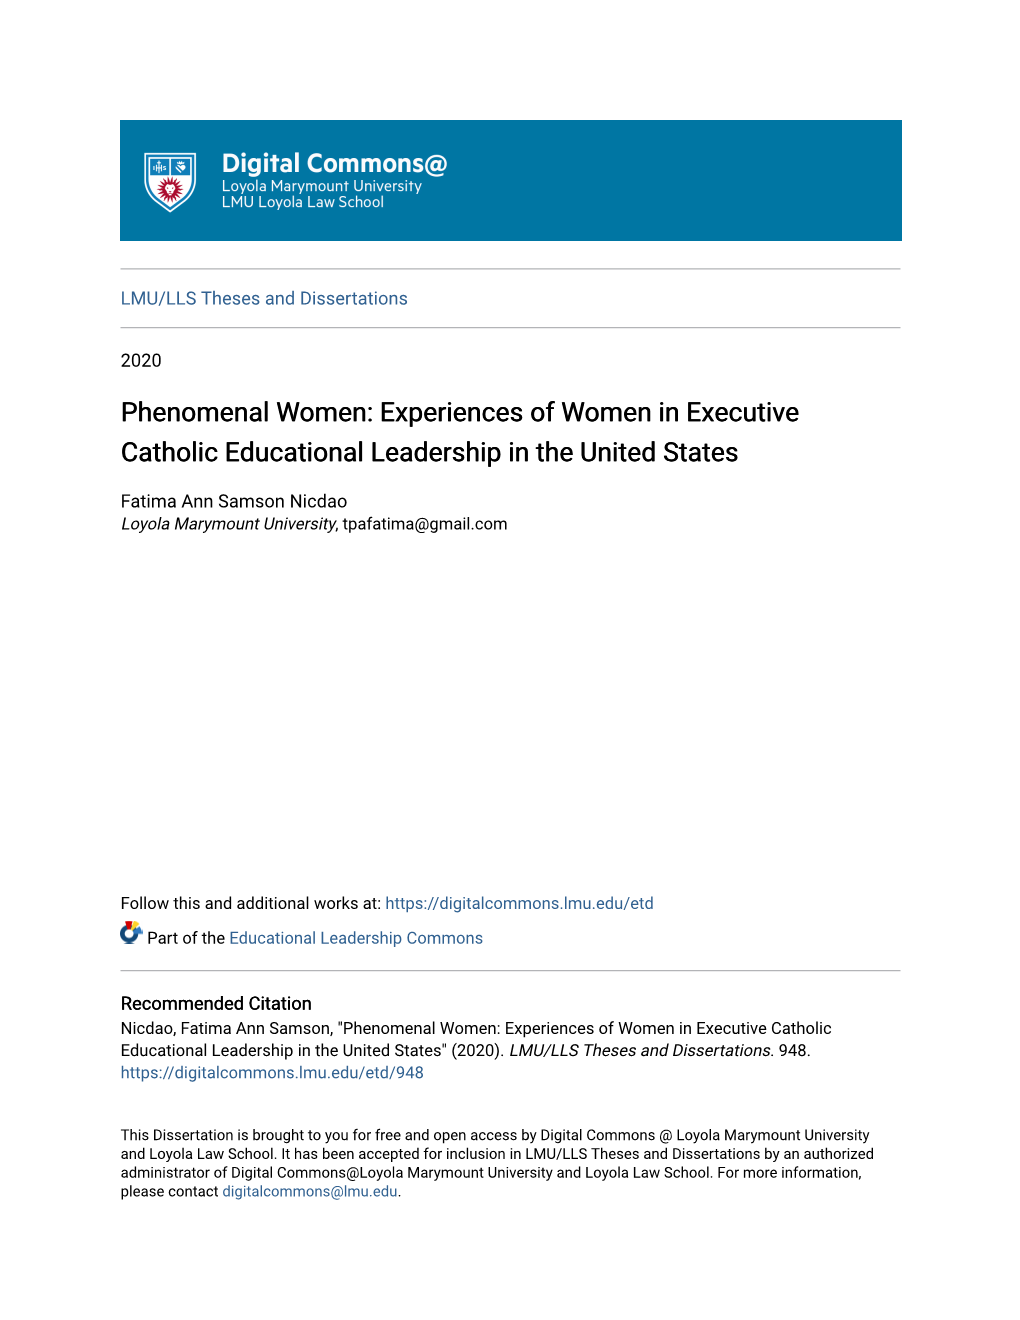 Experiences of Women in Executive Catholic Educational Leadership in the United States